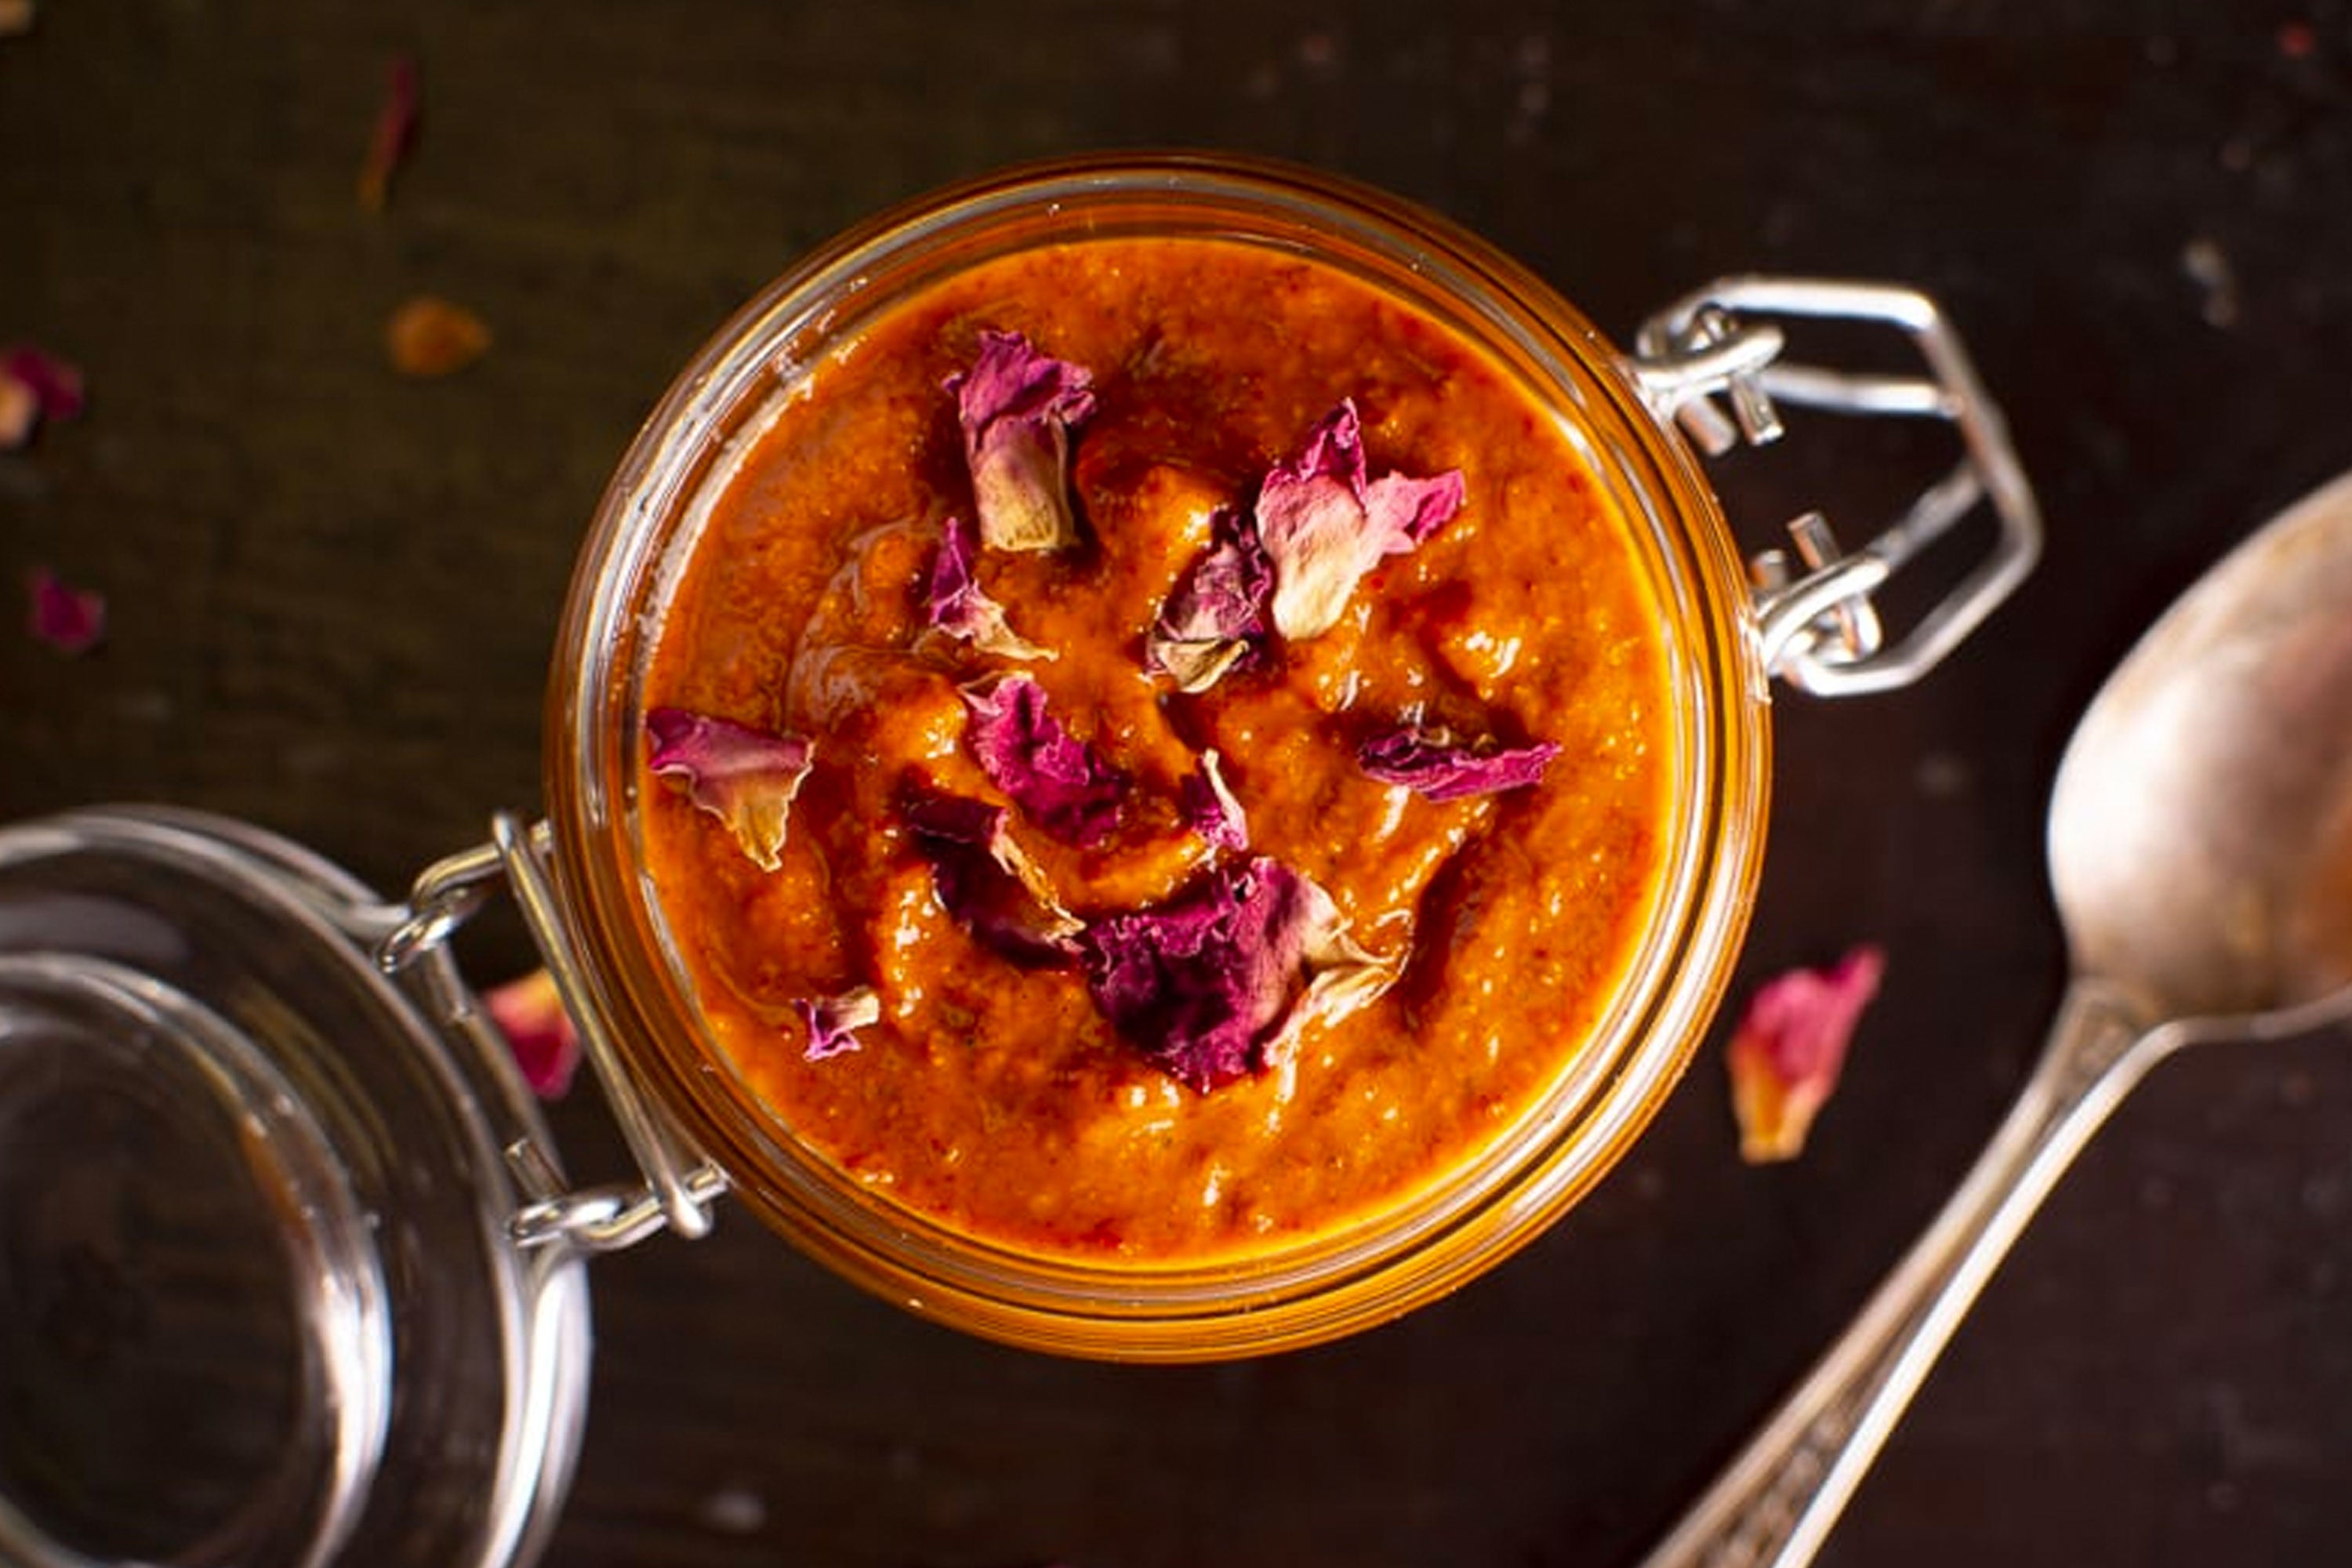 Rose harissa in an open jar with a black background and spoon to the right